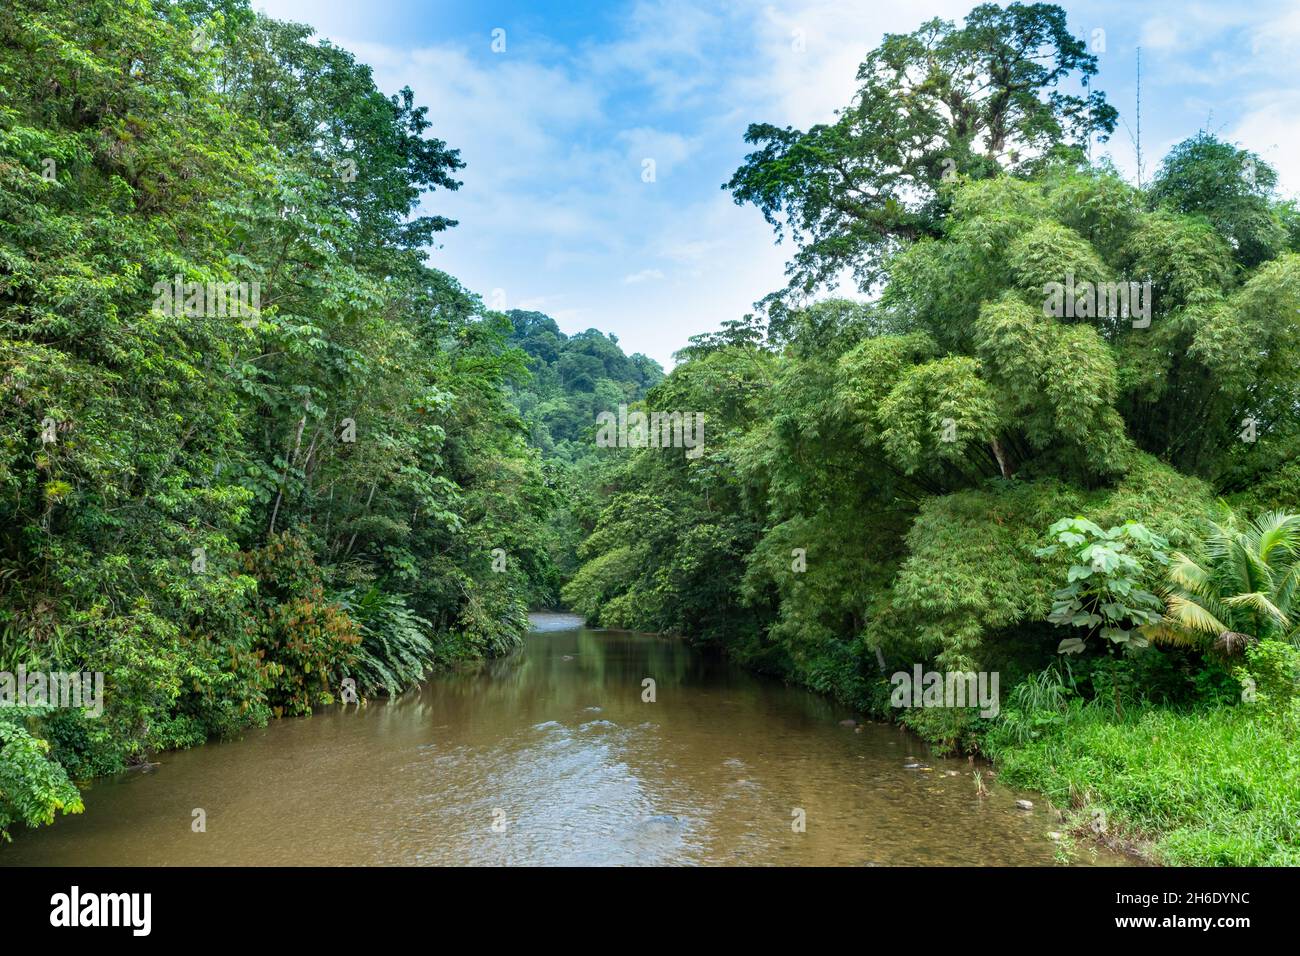 A calm river cutting through lush tropical forest in Grand Riviere, a village in Trinidad and Tobago, West Indies. Stock Photo